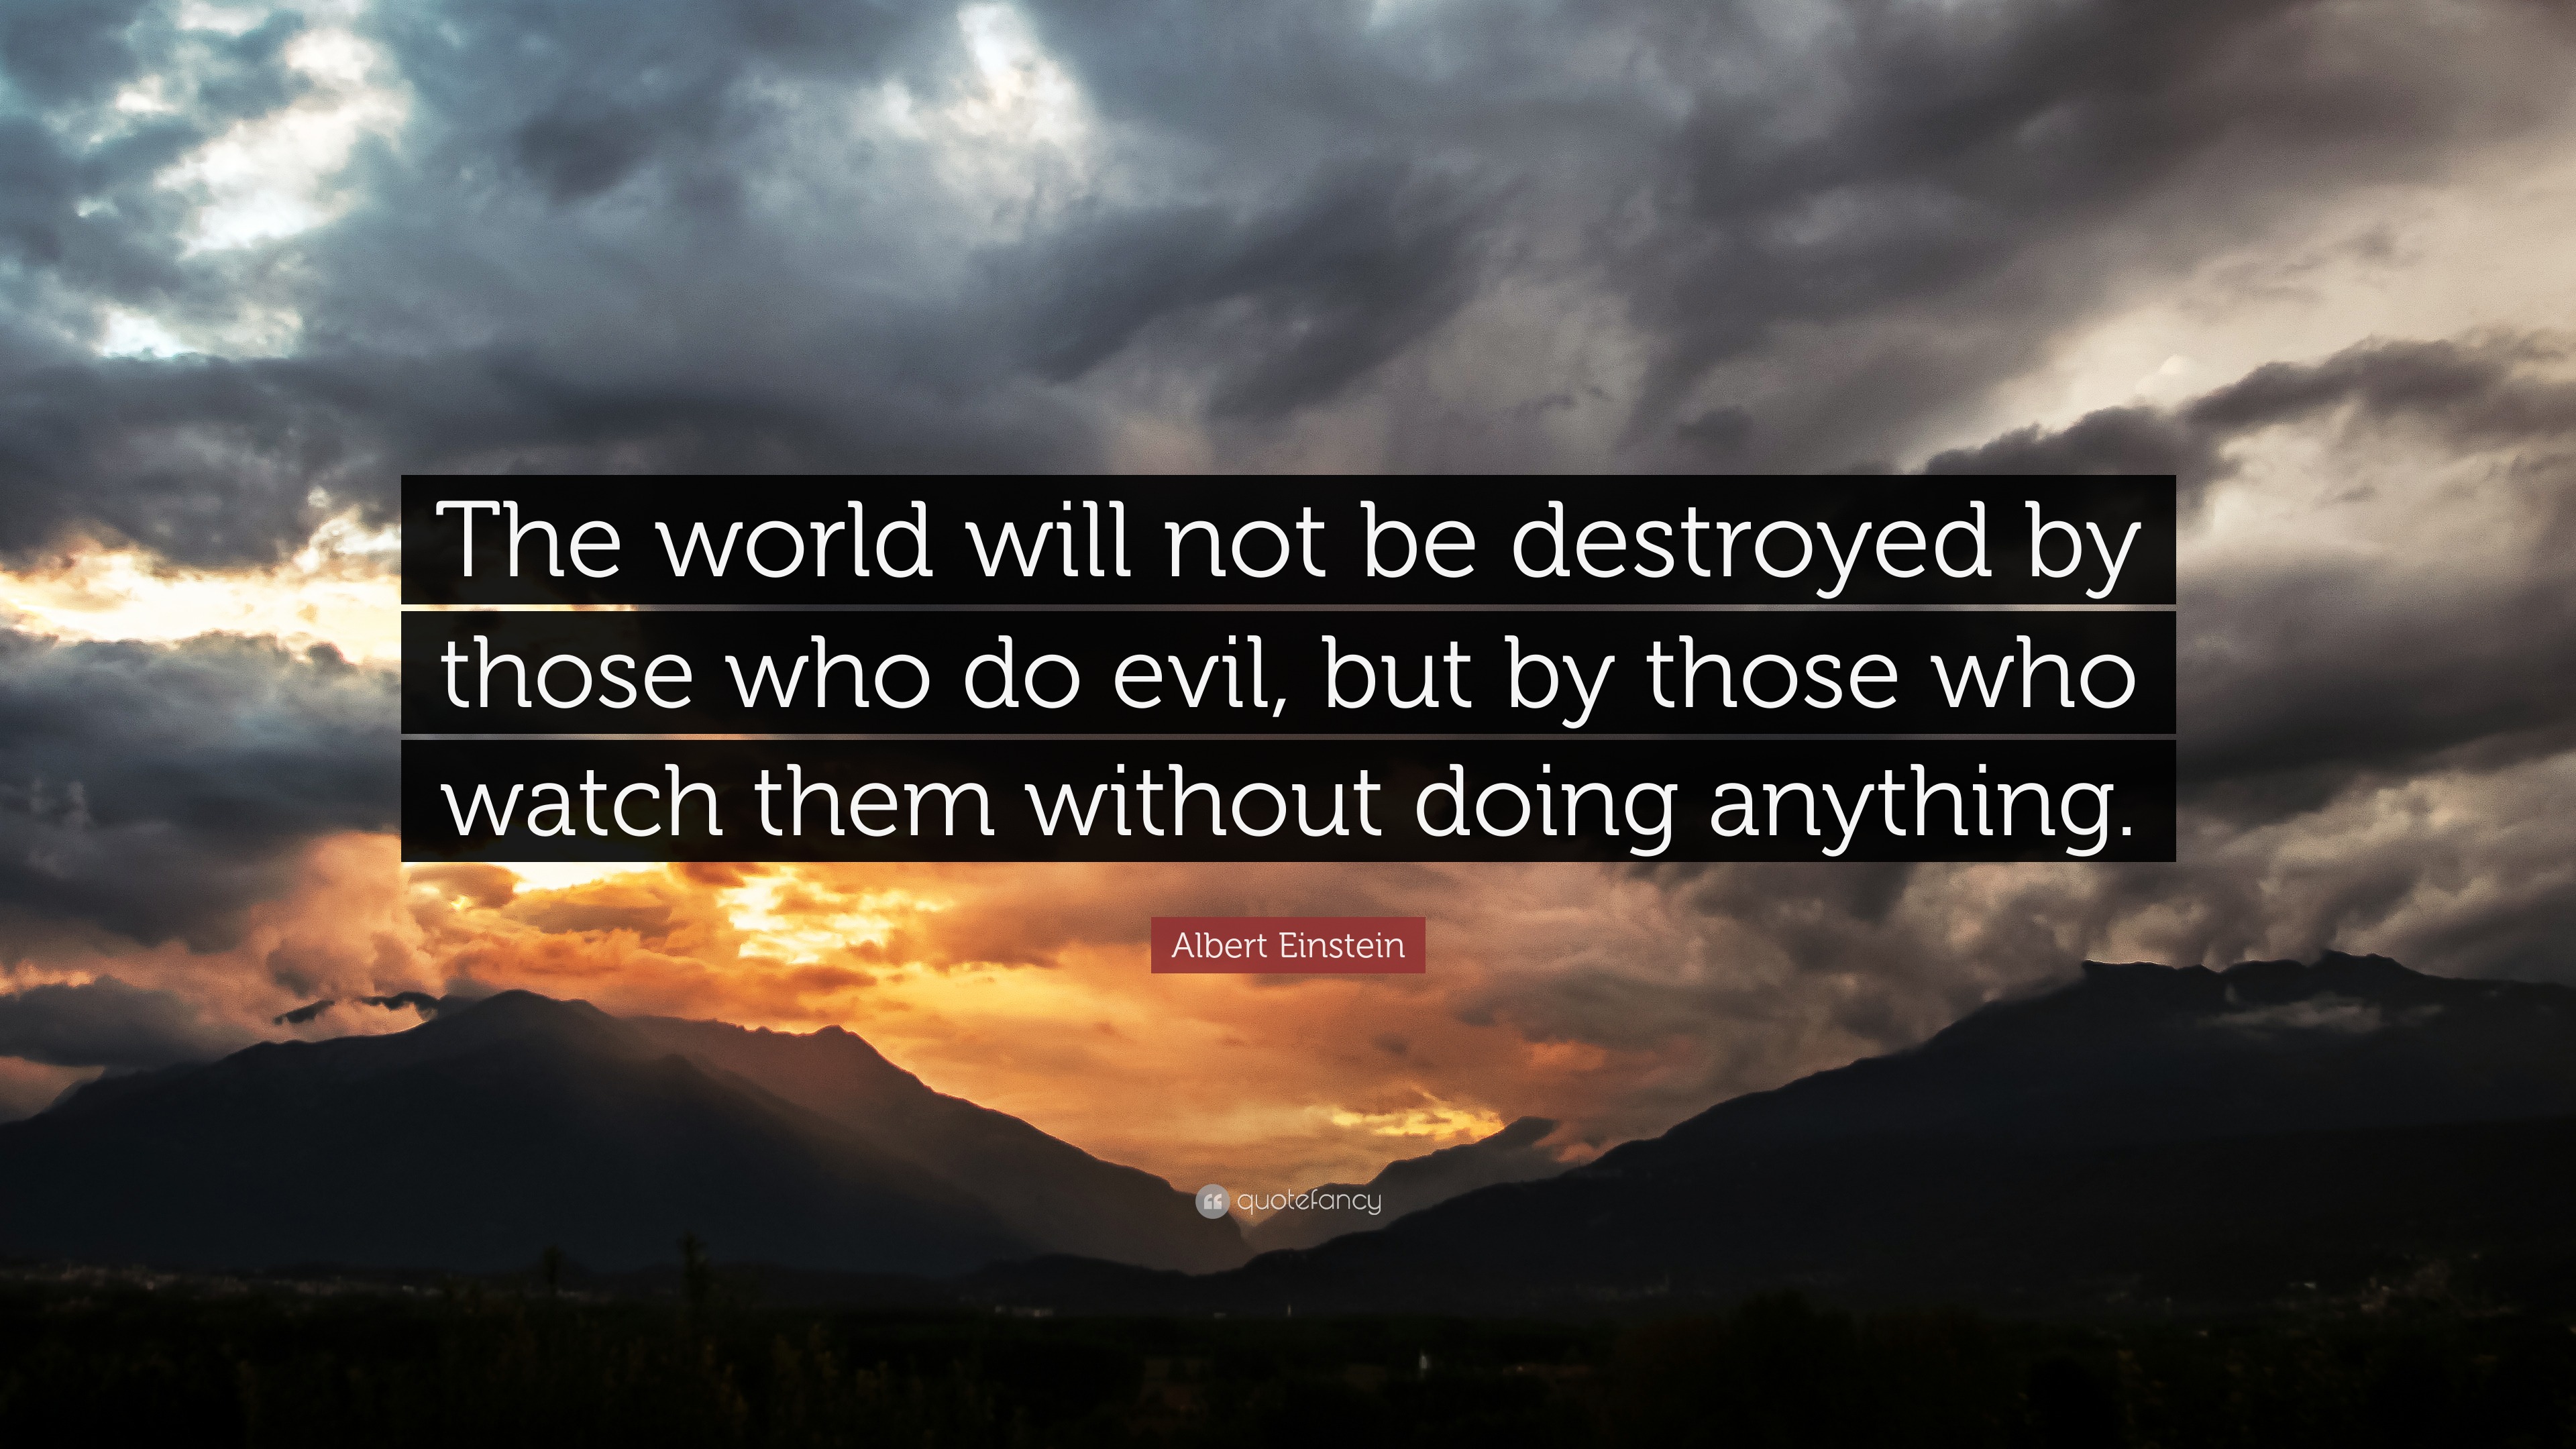 the world will not be destroyed by those who do evil